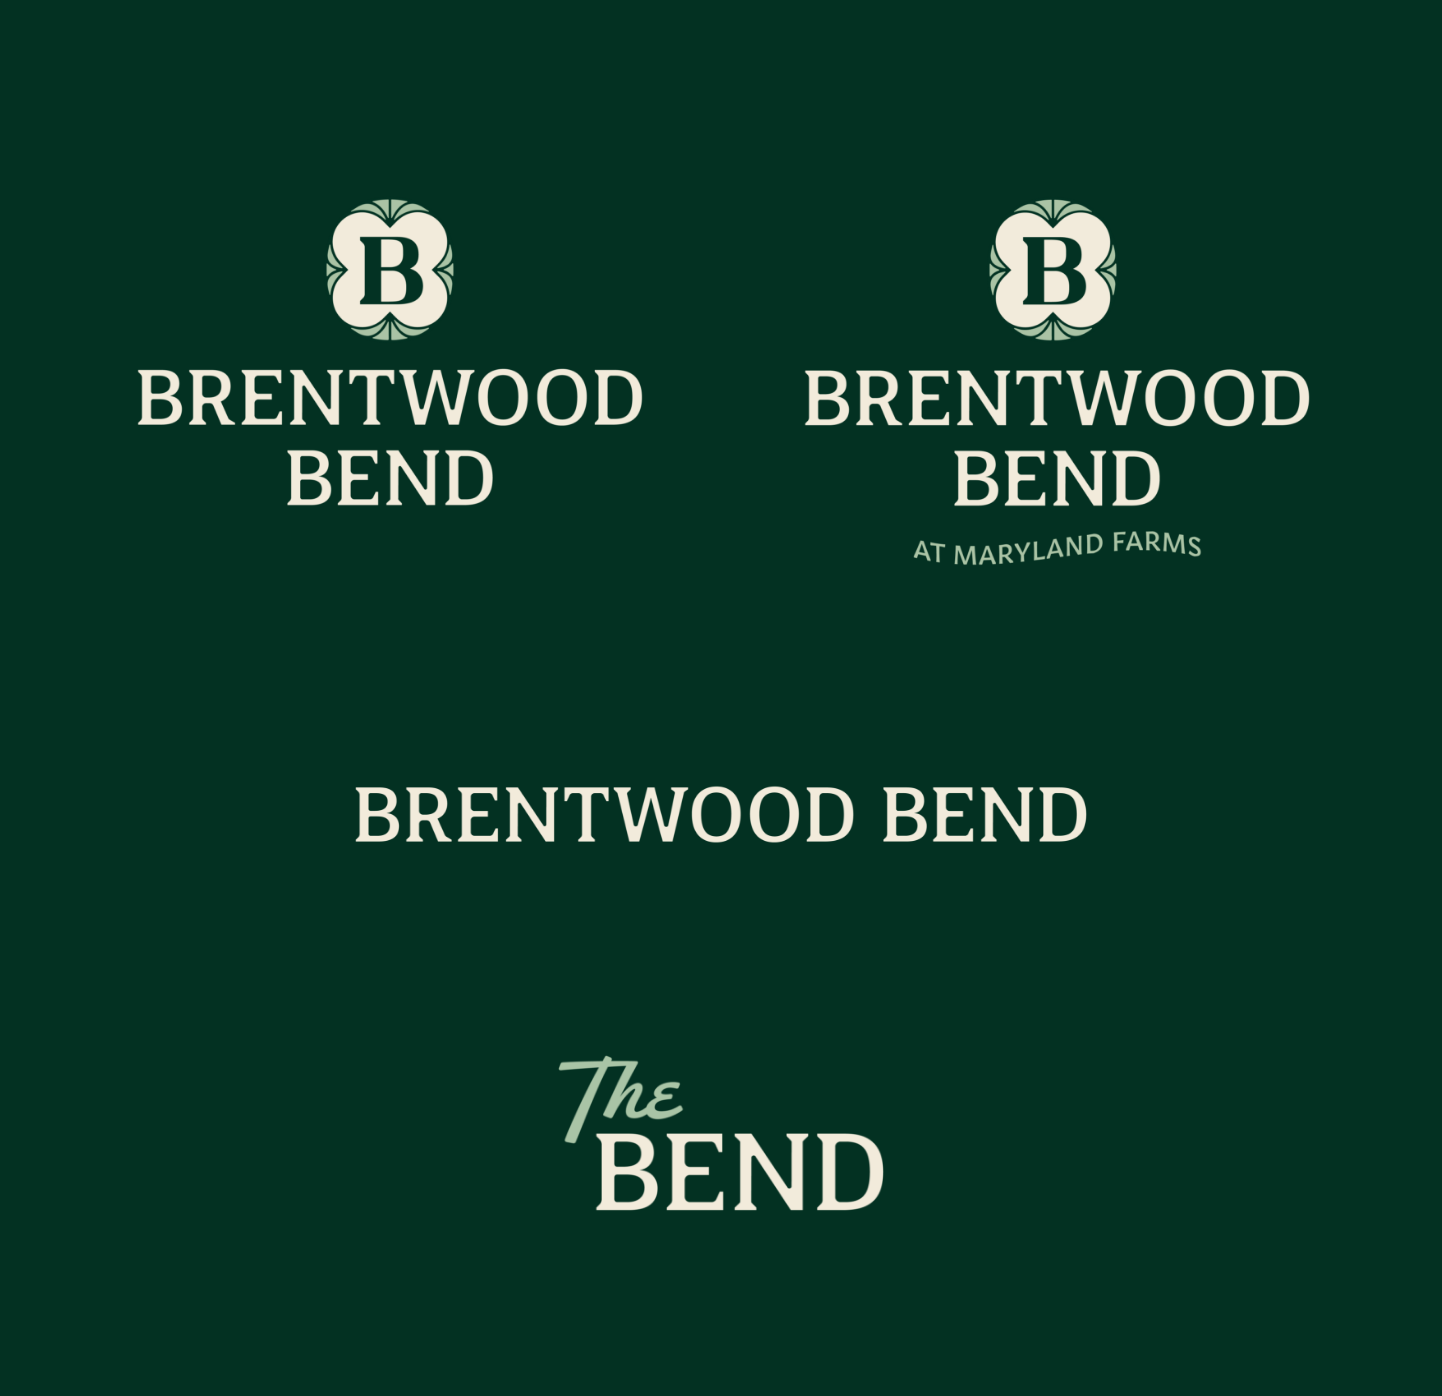 representation of the different logo lockups created for Brentwood Bend